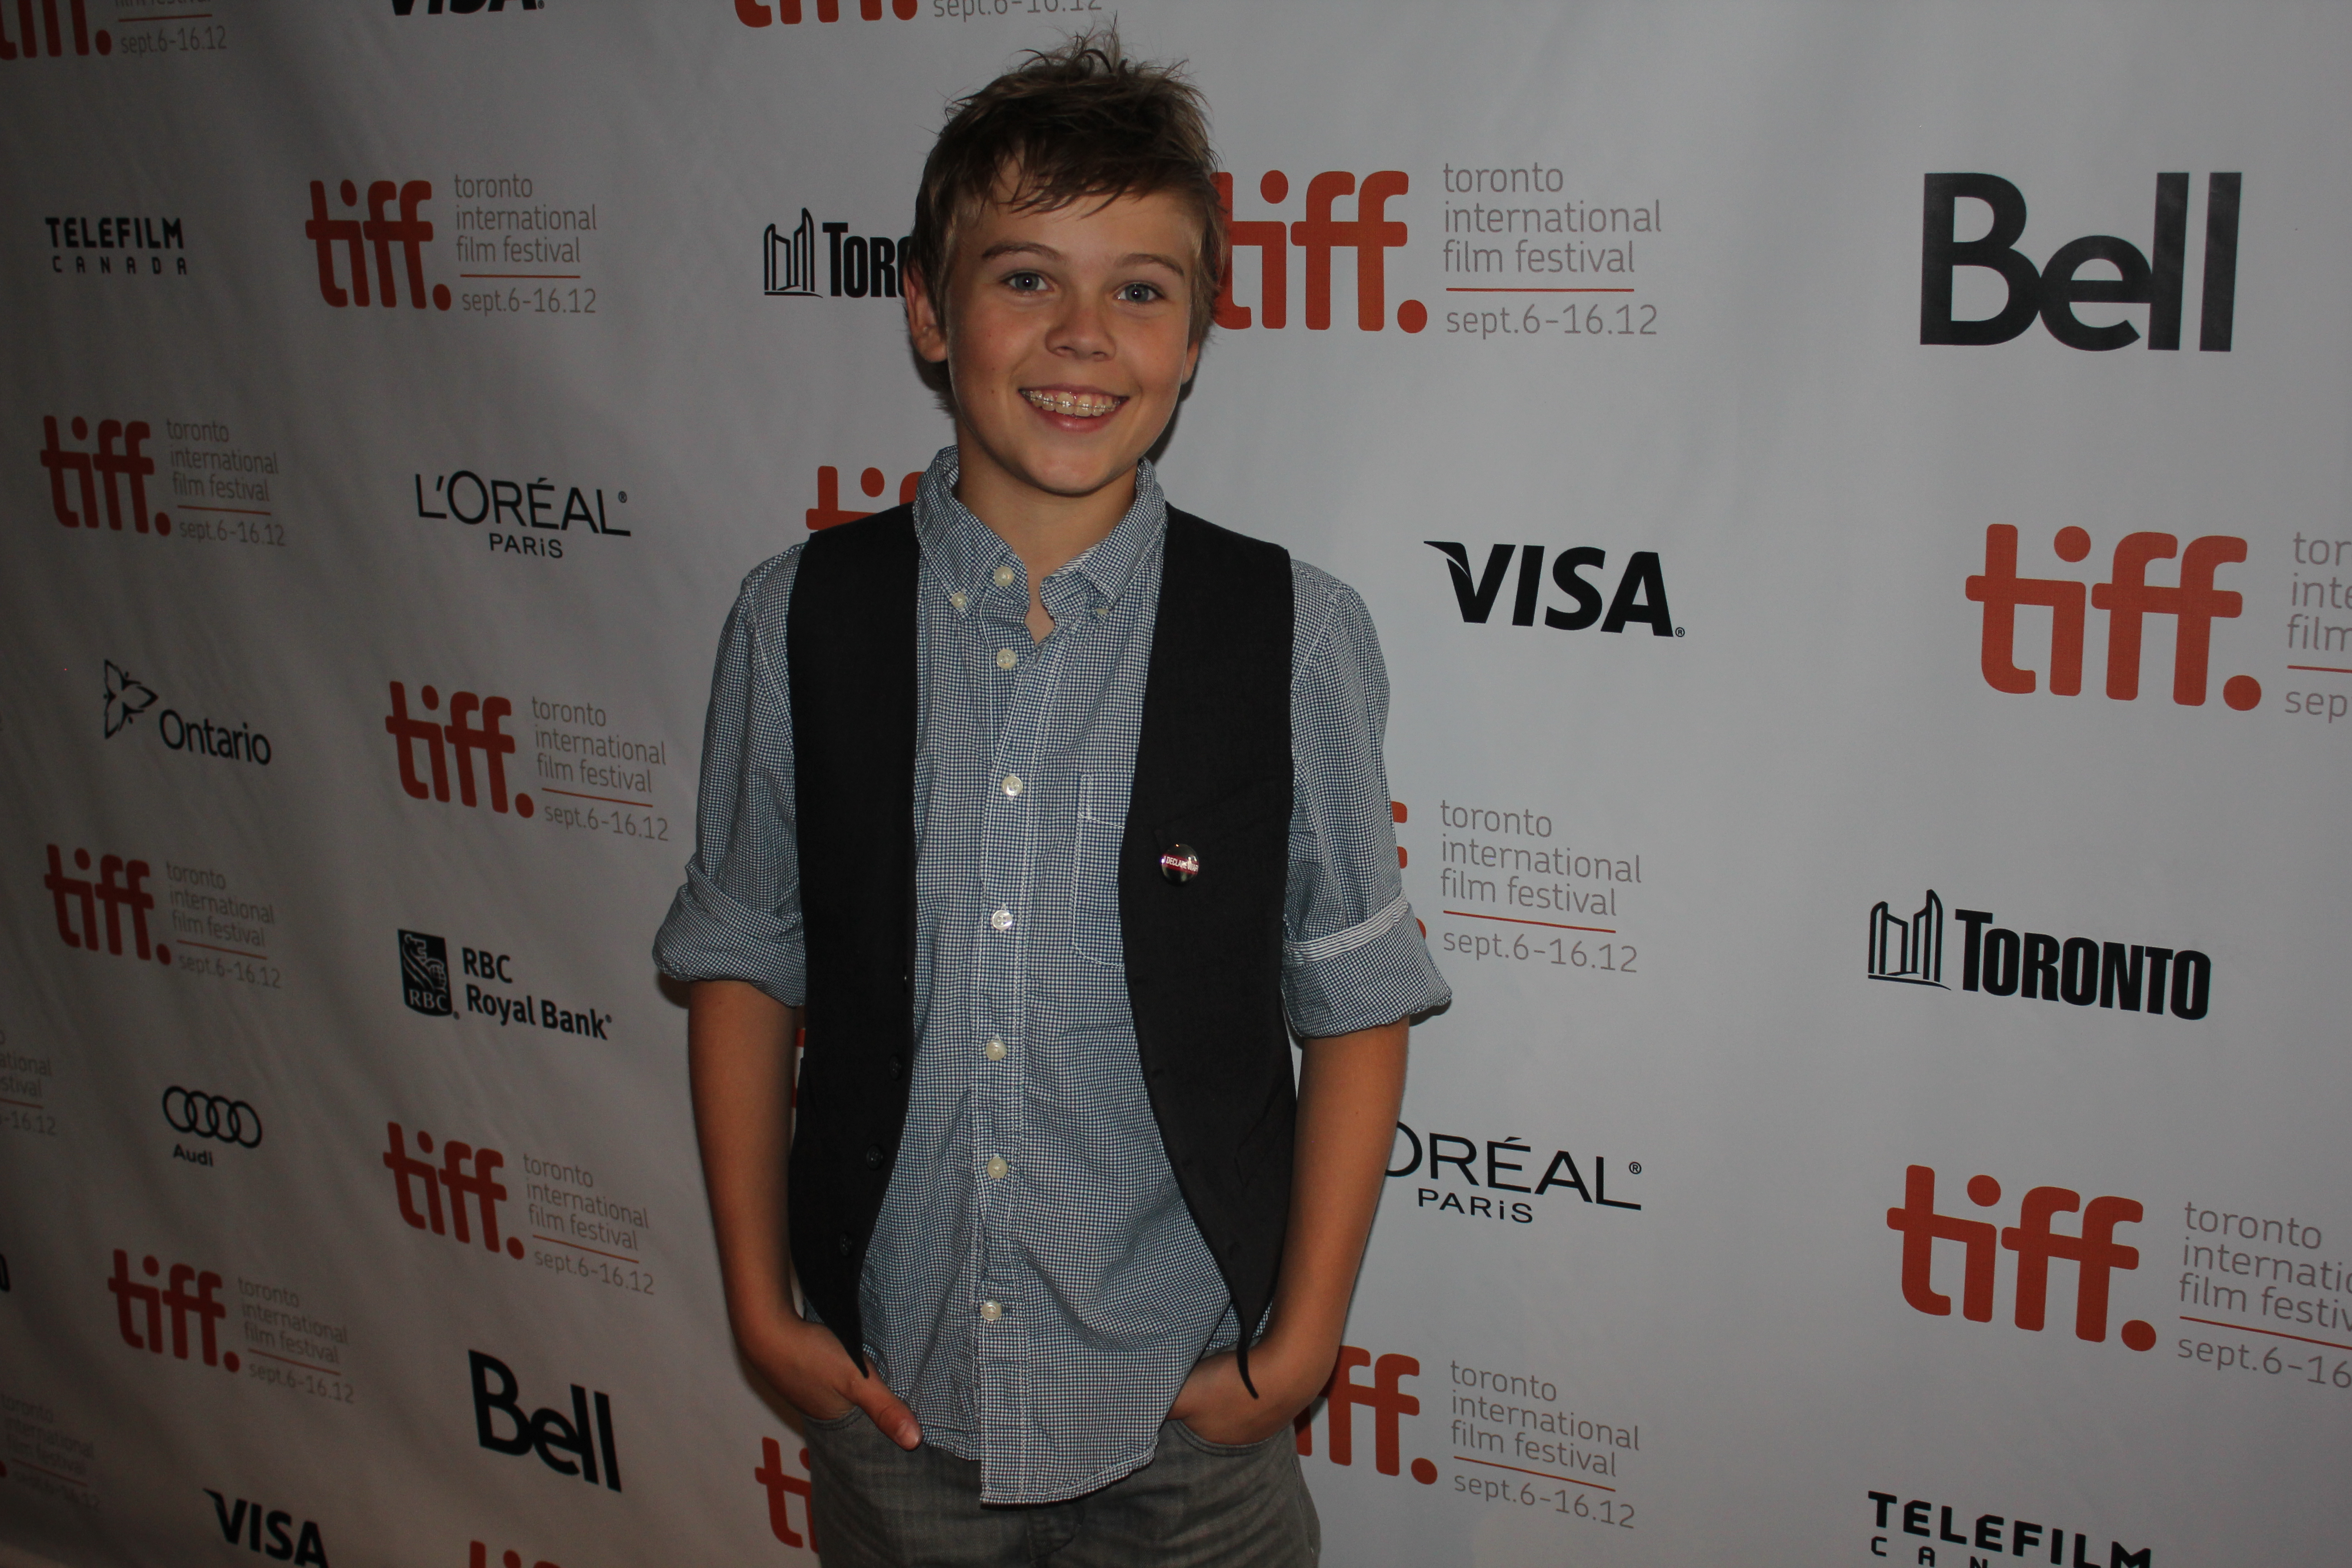 Gage at the world premiere of 